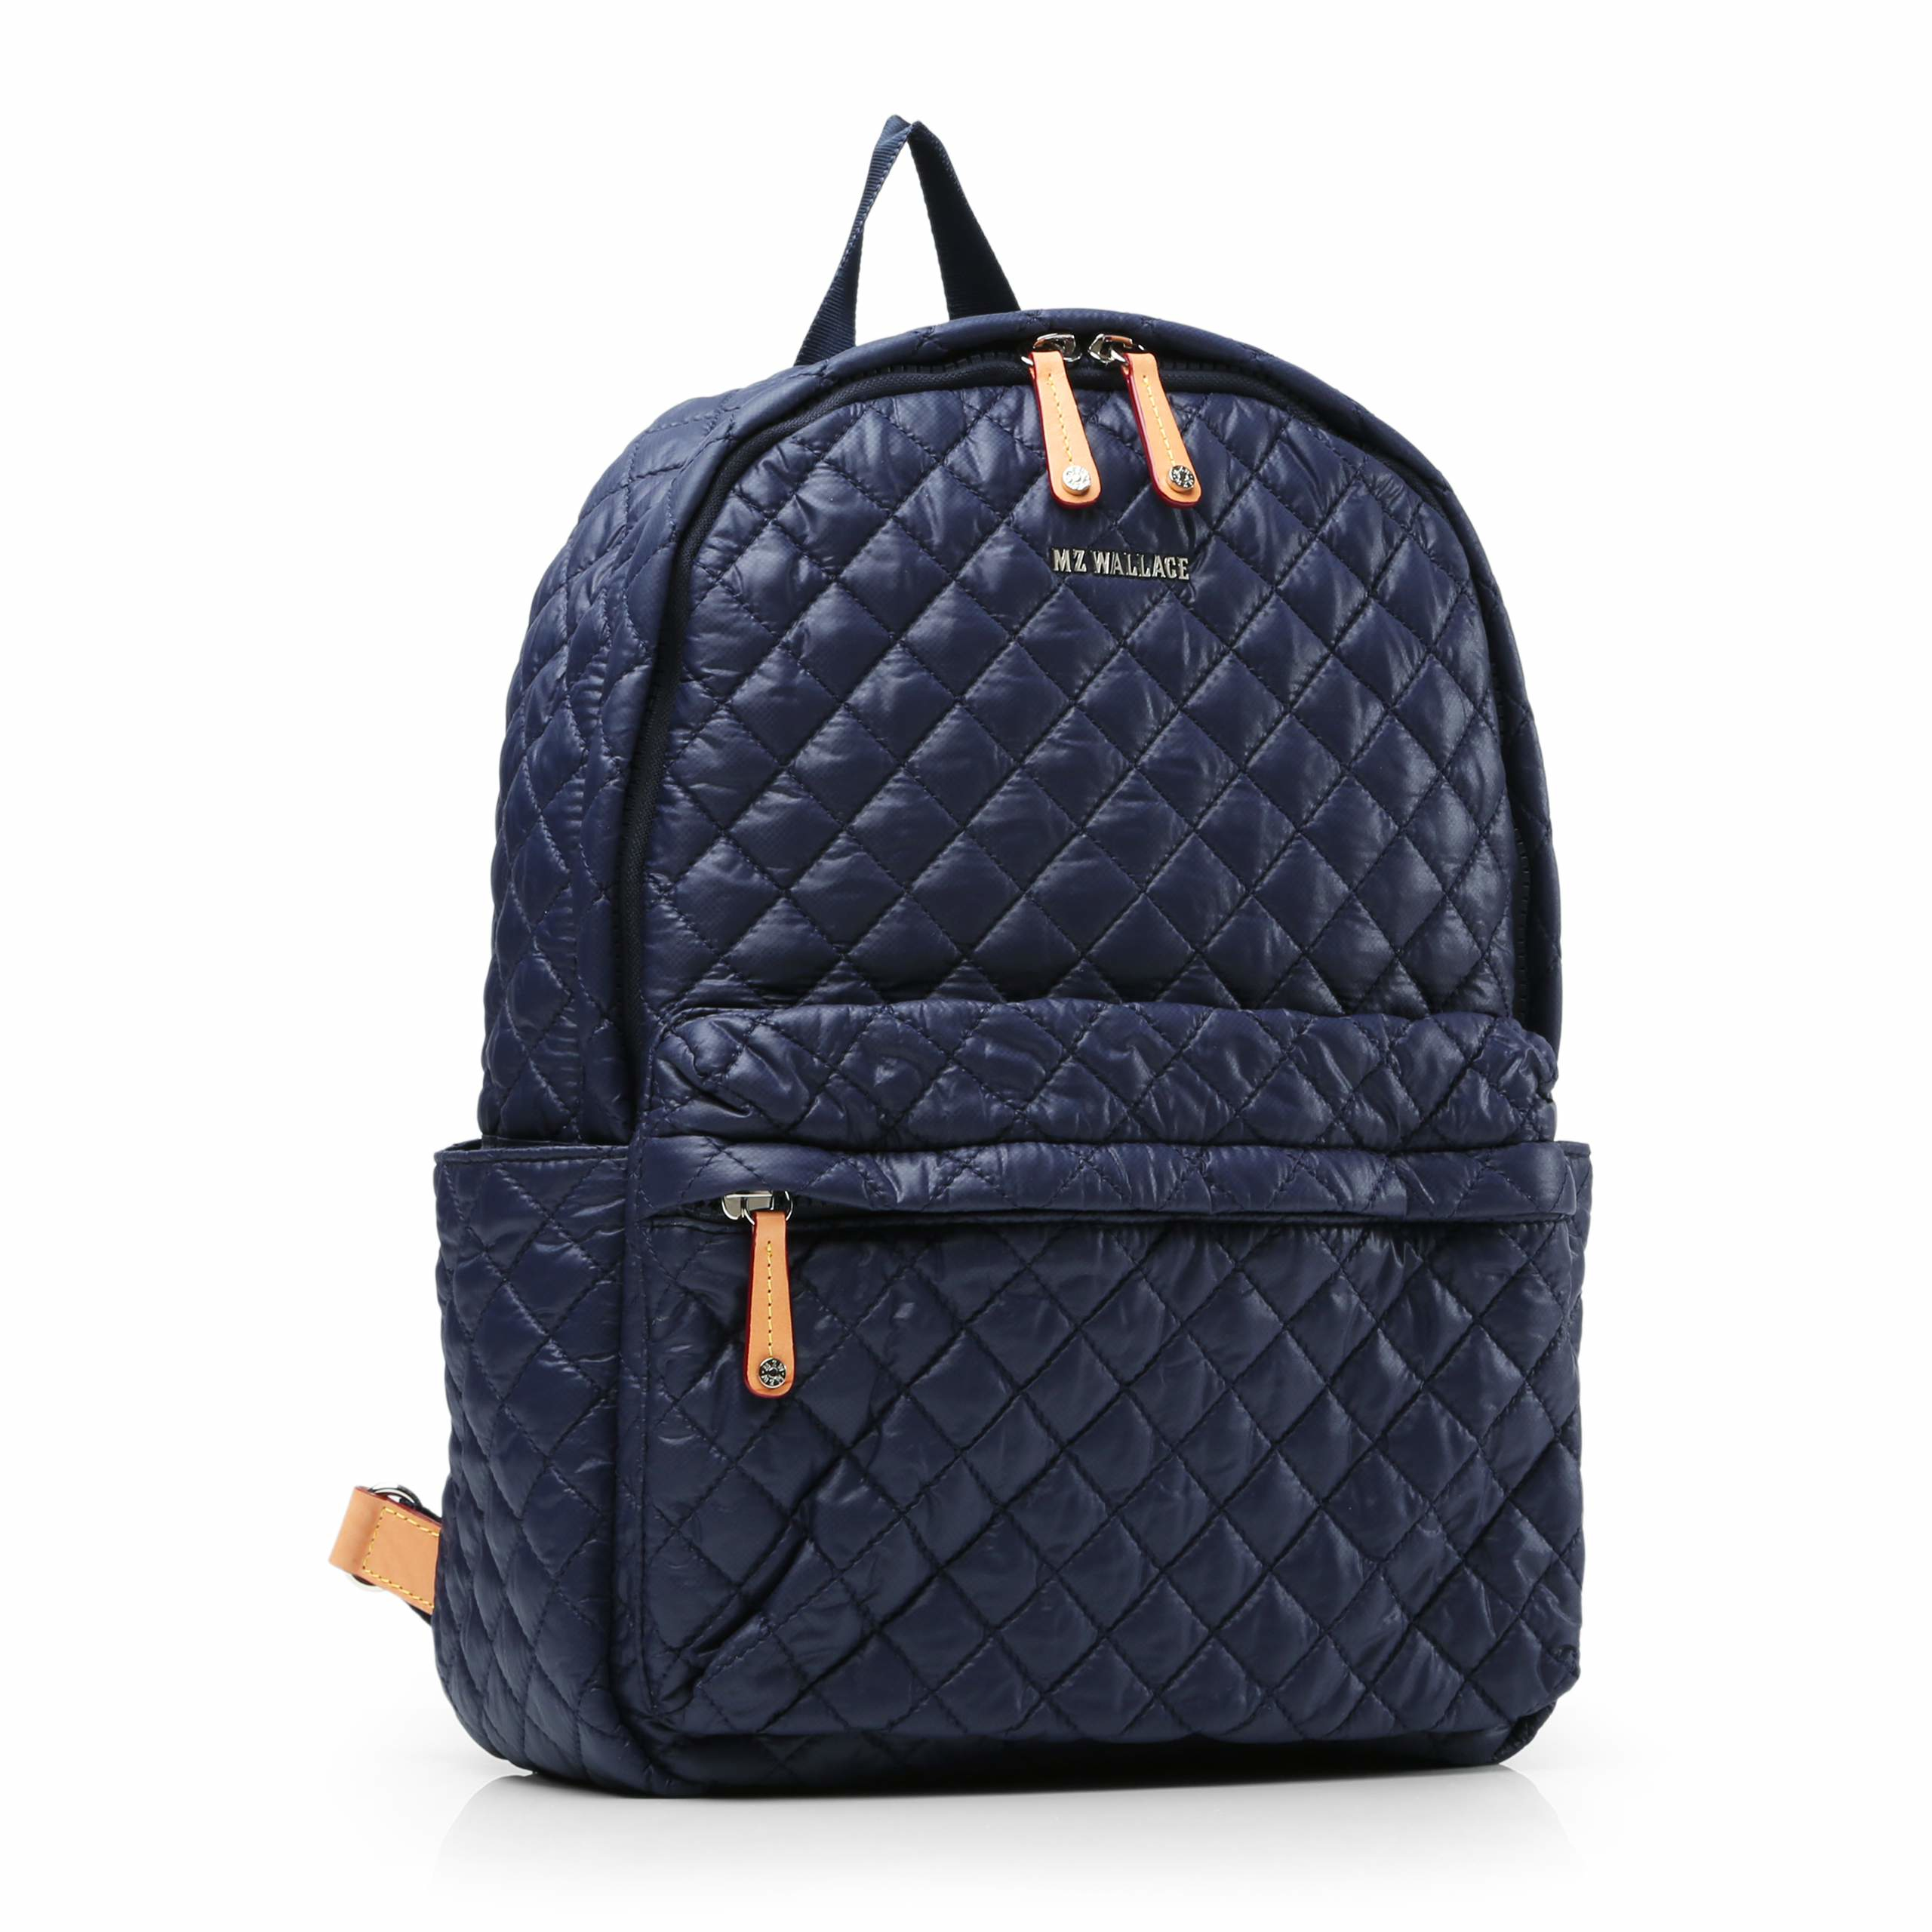 Lyst - Mz Wallace Dawn Oxford Metro Backpack in Blue